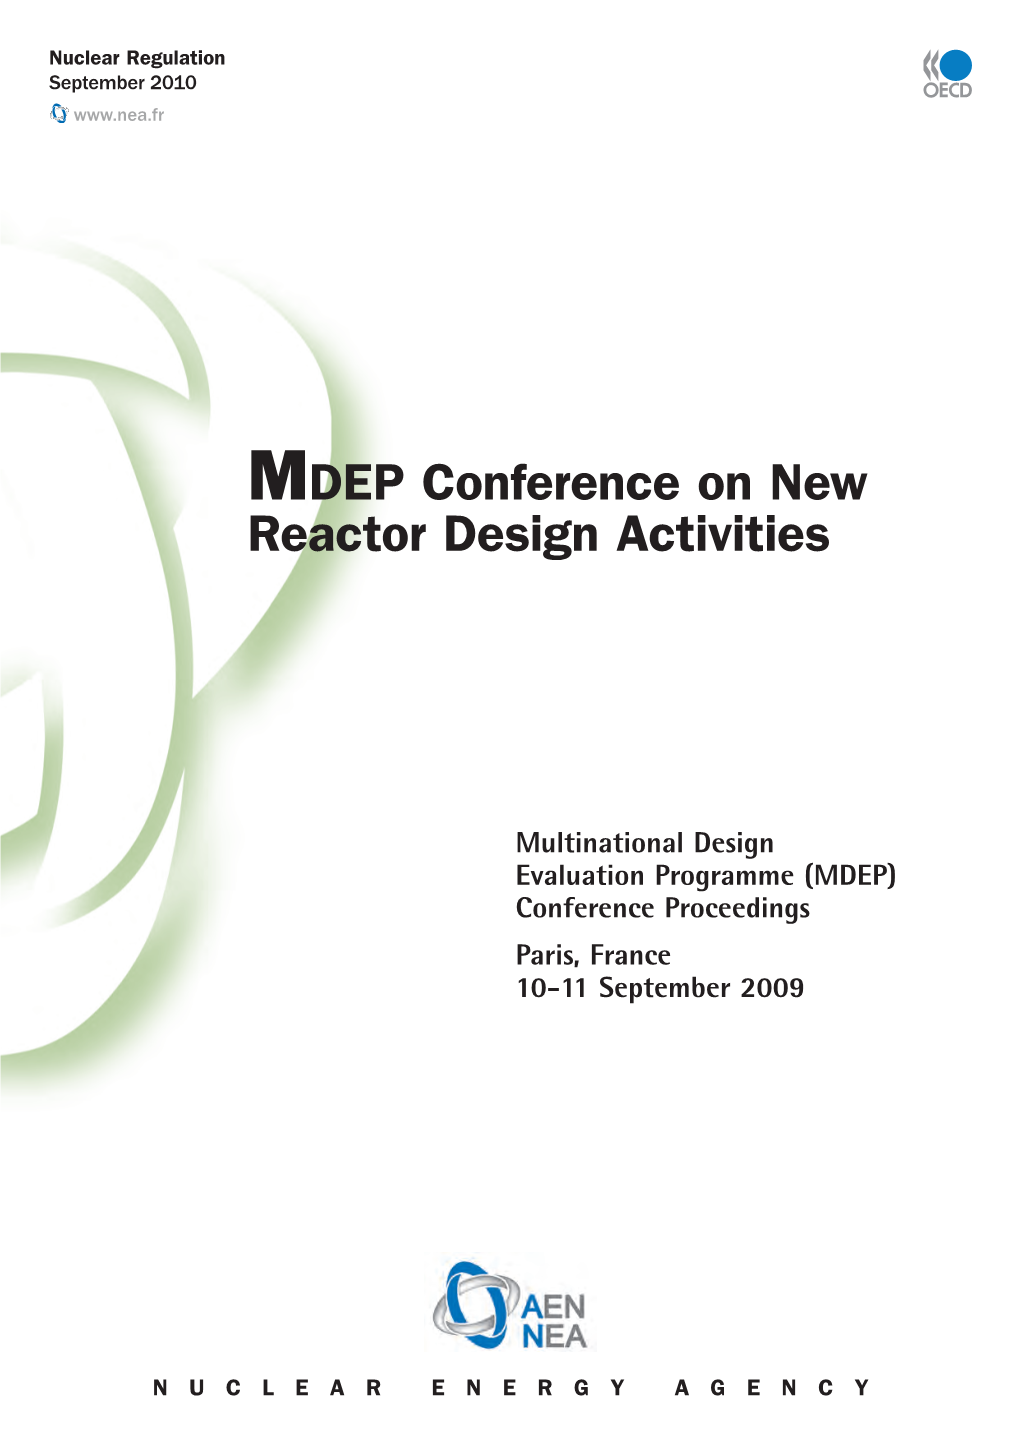 MDEP Conference on New Reactor Design Activities